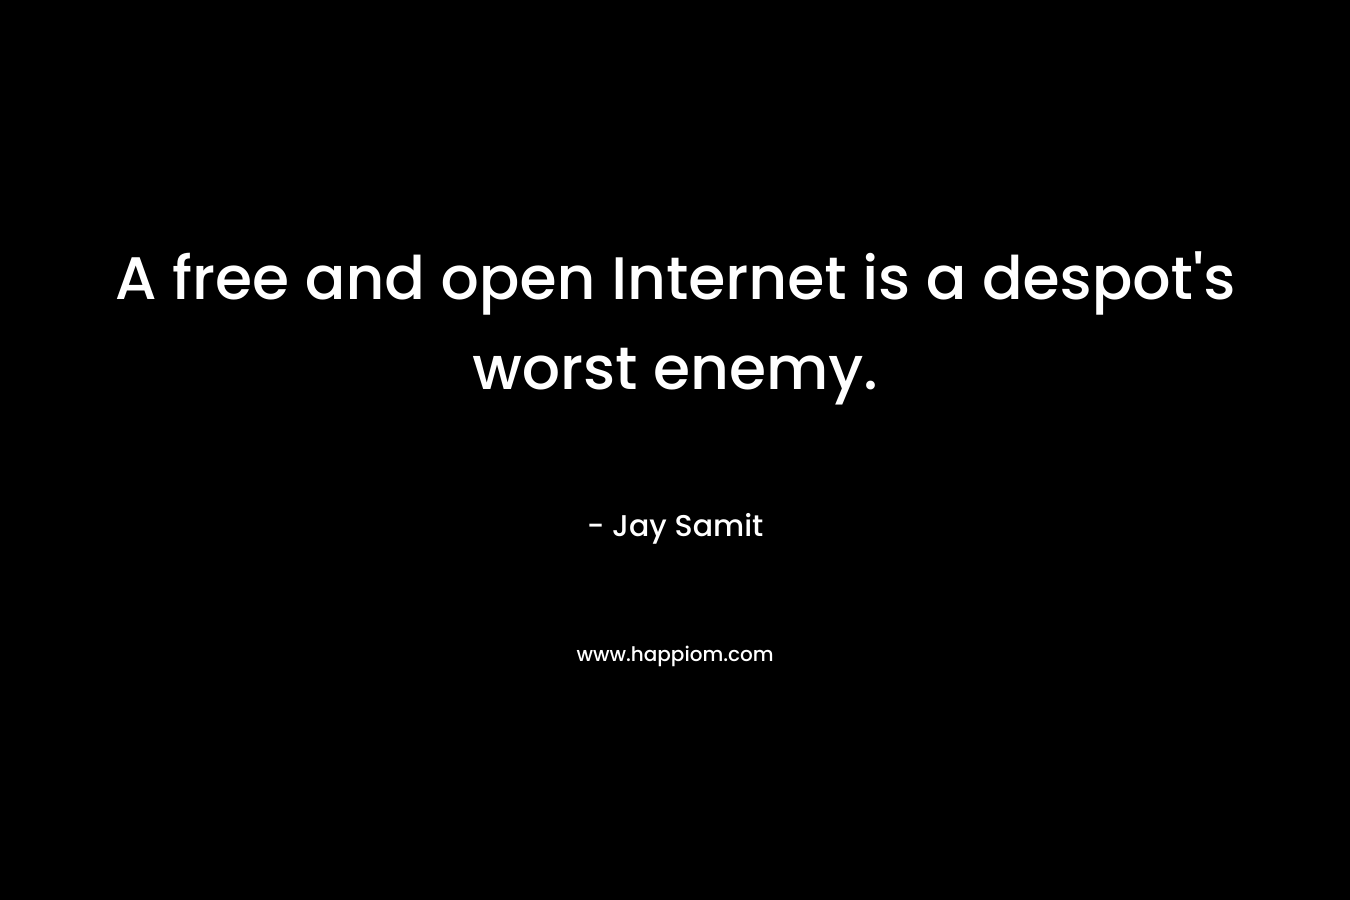 A free and open Internet is a despot’s worst enemy. – Jay Samit